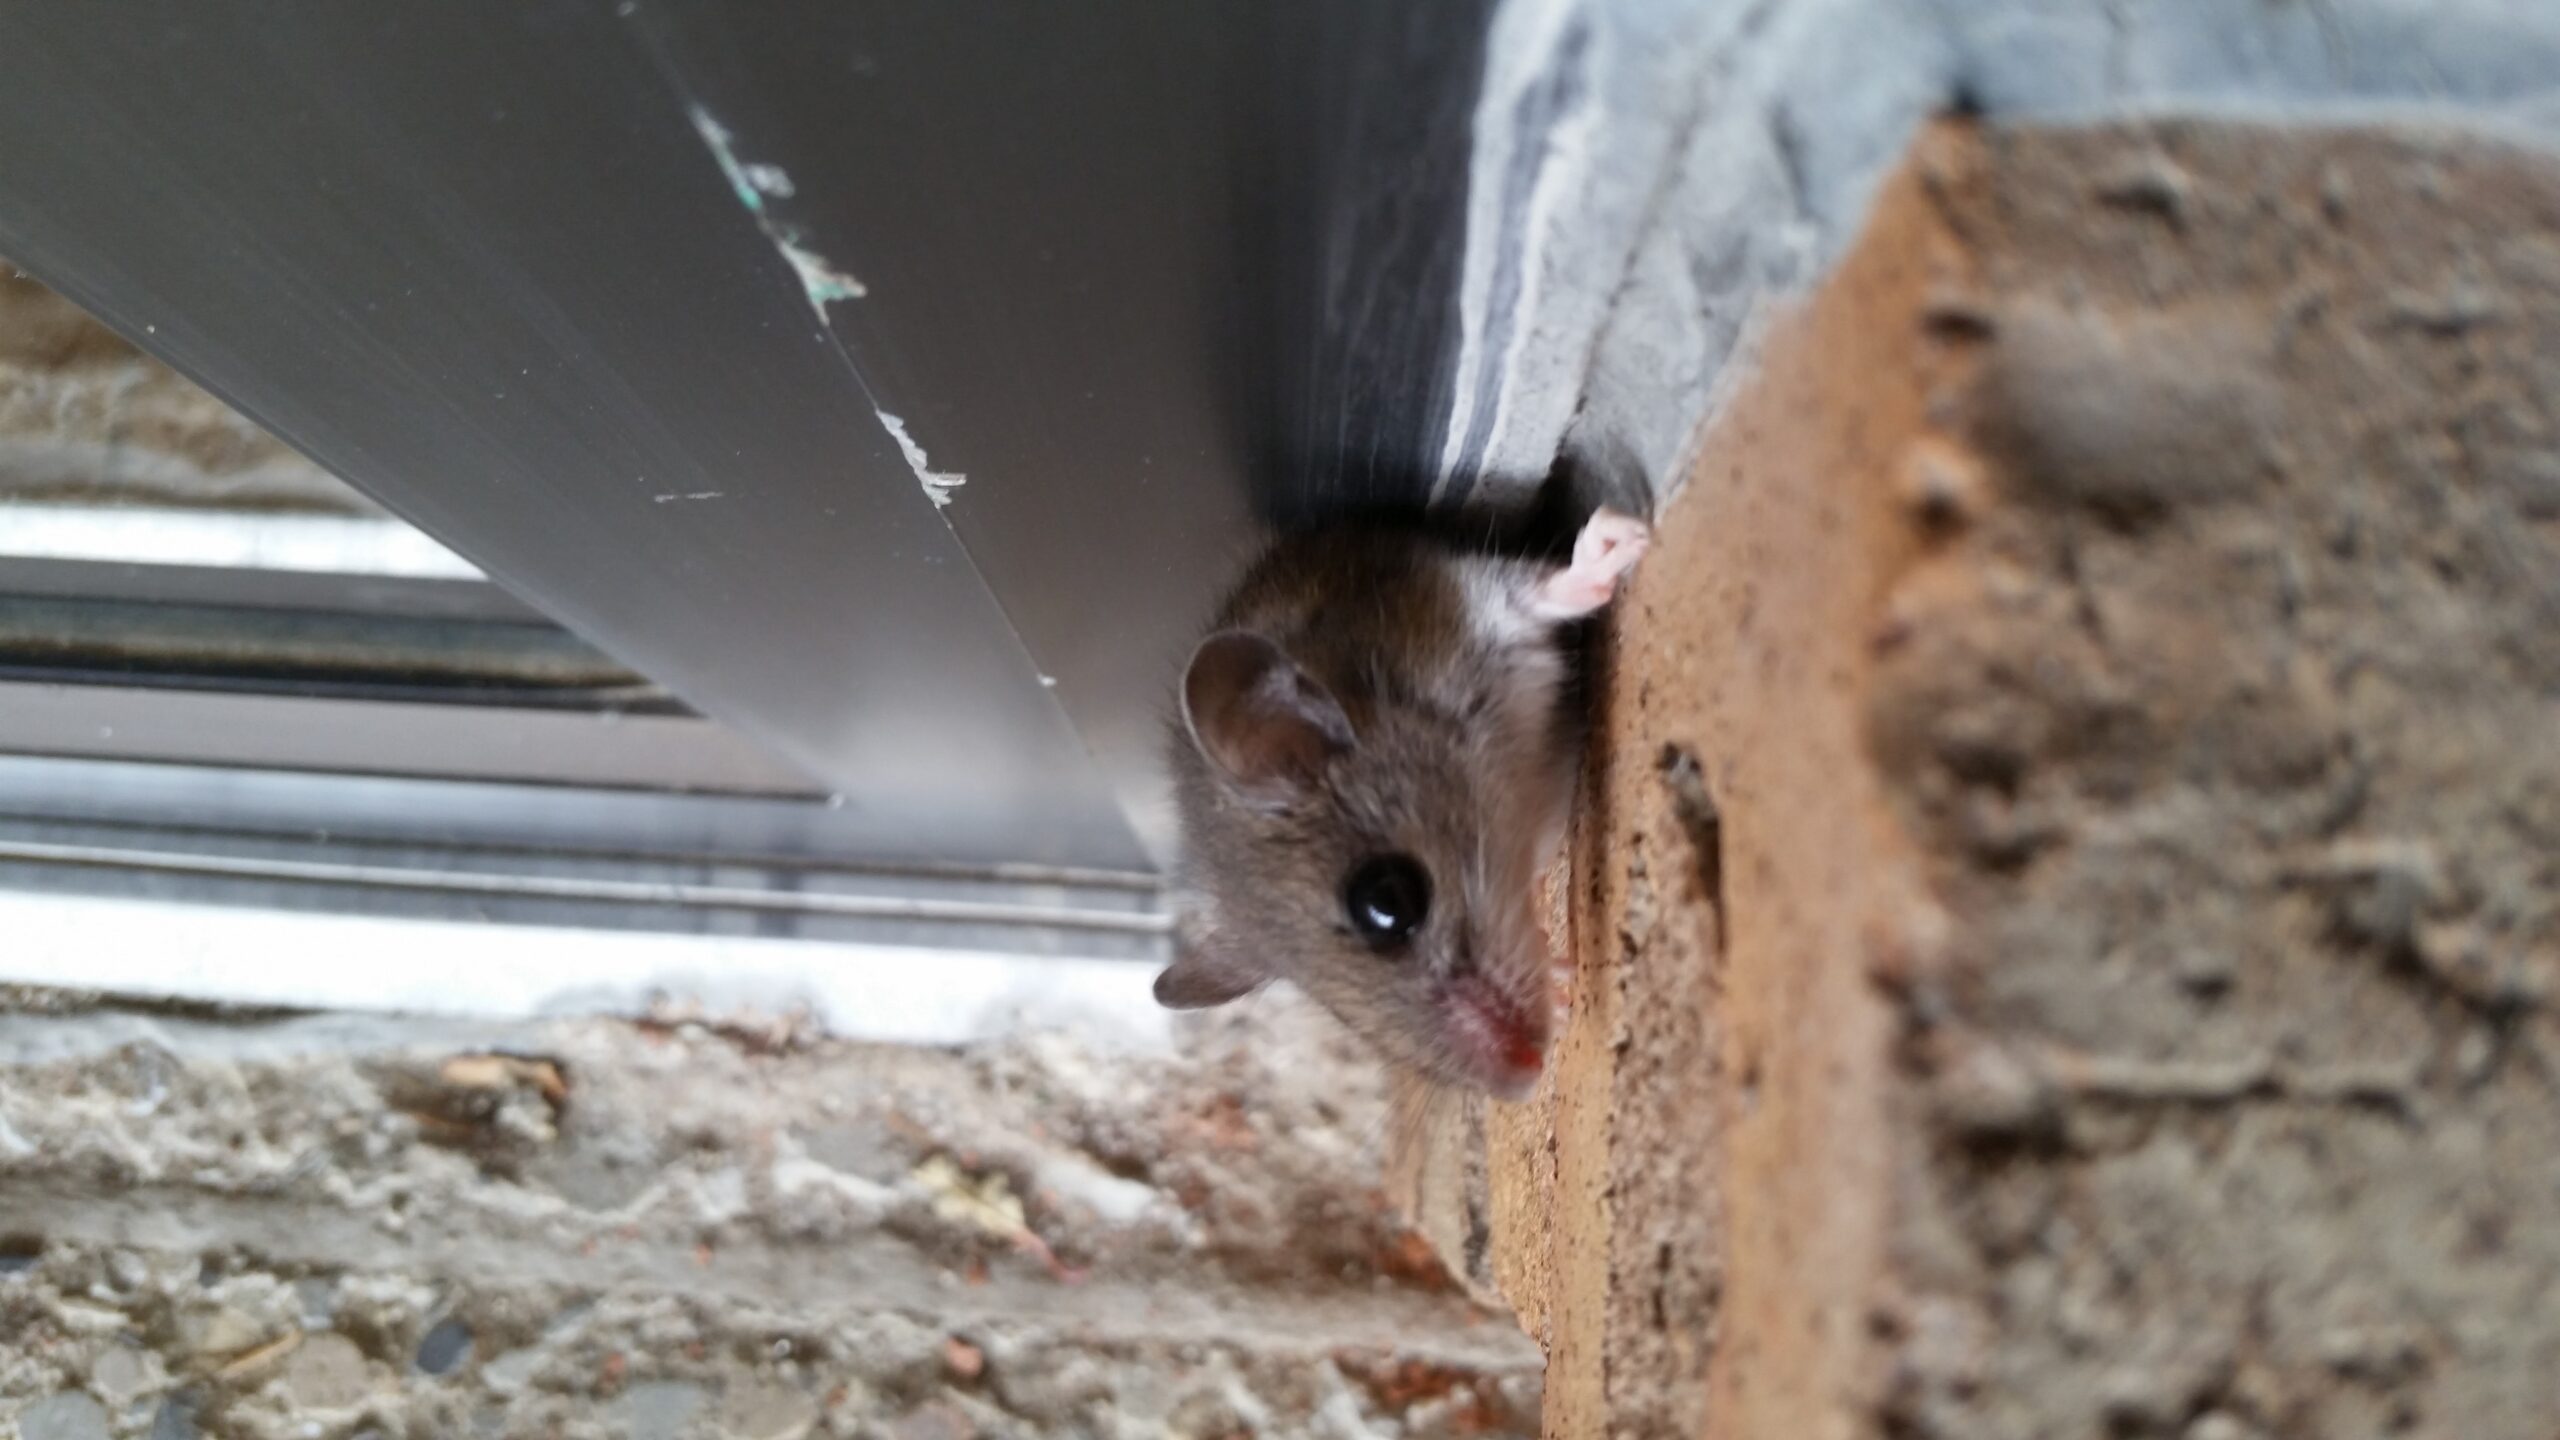 https://www.skedaddlewildlife.com/wp-content/uploads/2022/07/mouse-climbs-brick-wall-on-home--scaled.jpg